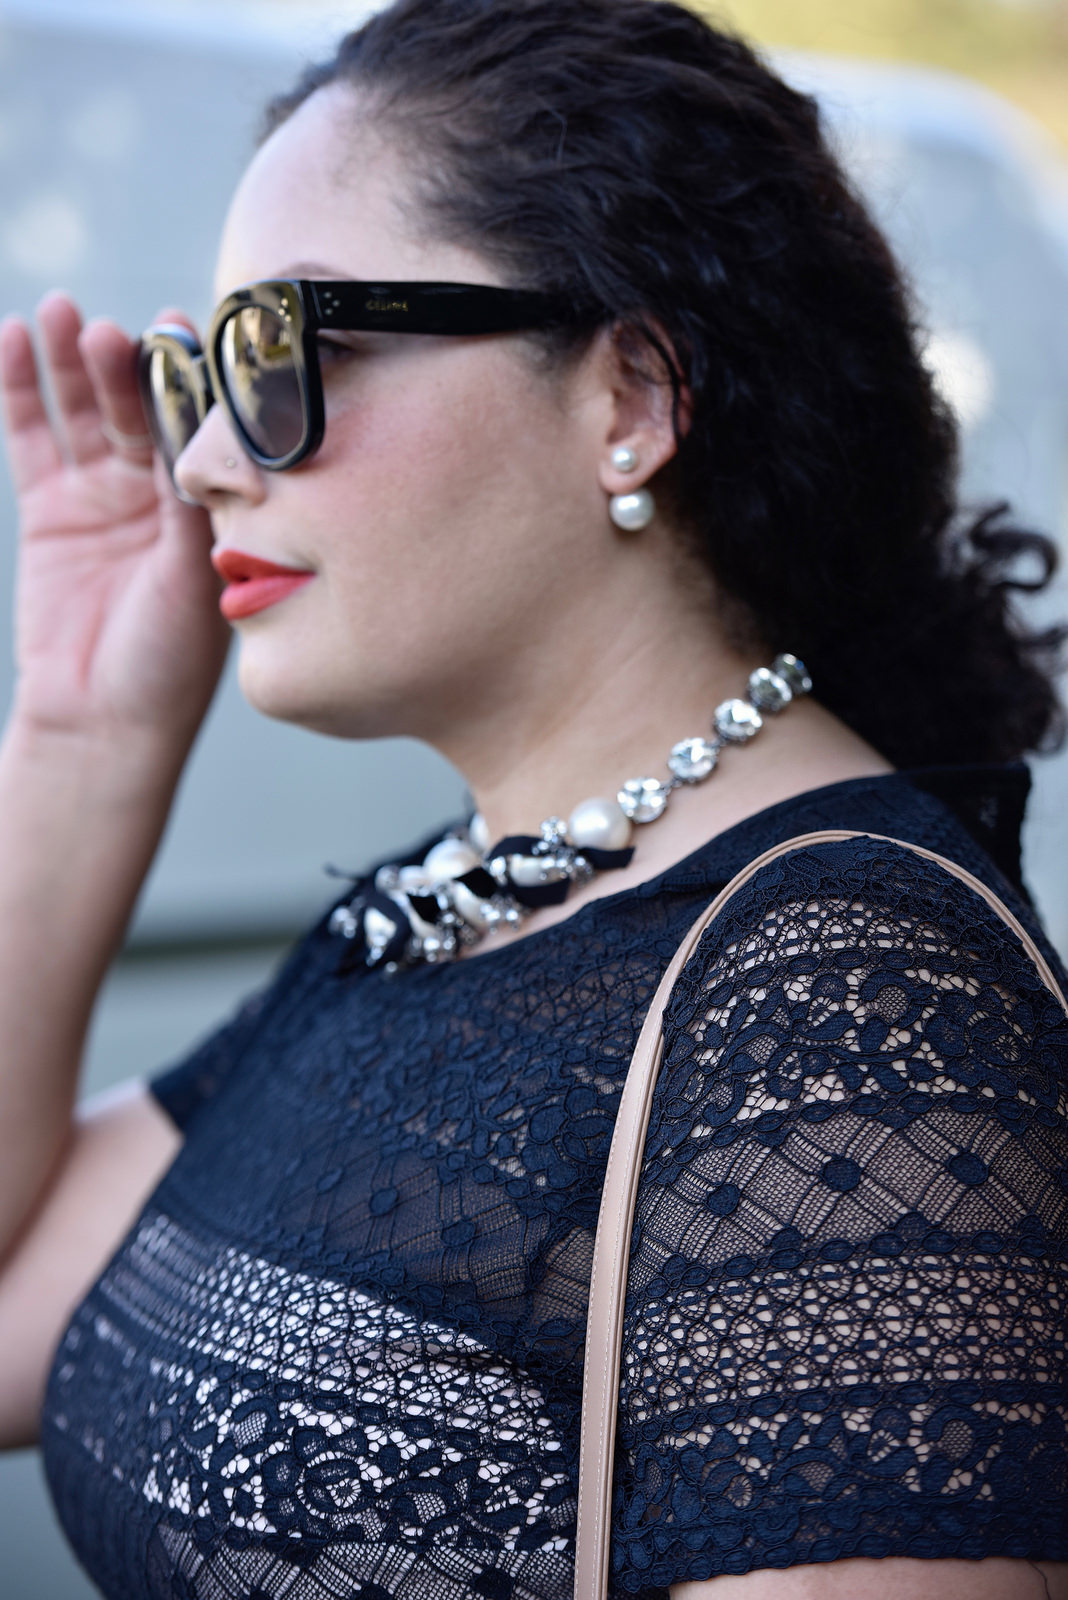 Girl With Curves wearing a pearl necklace from Ann Taylor, Audrey Sunglasses from Celine and Lace Dress from Maggy London at Nordstrom.